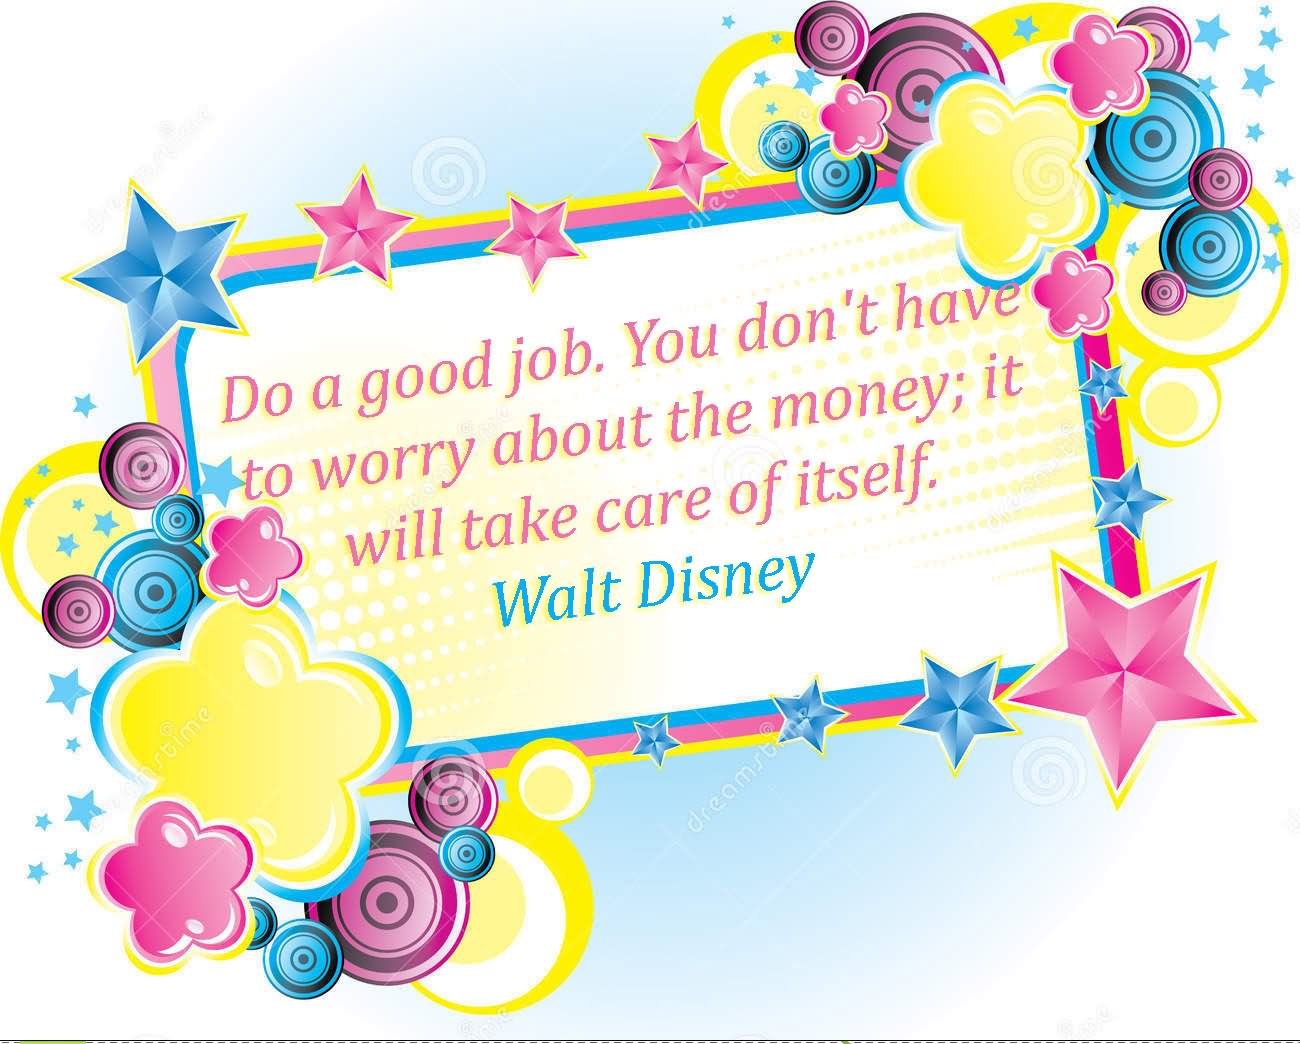 Do a good job. You don't have to worry about the money; it will take care of itself.